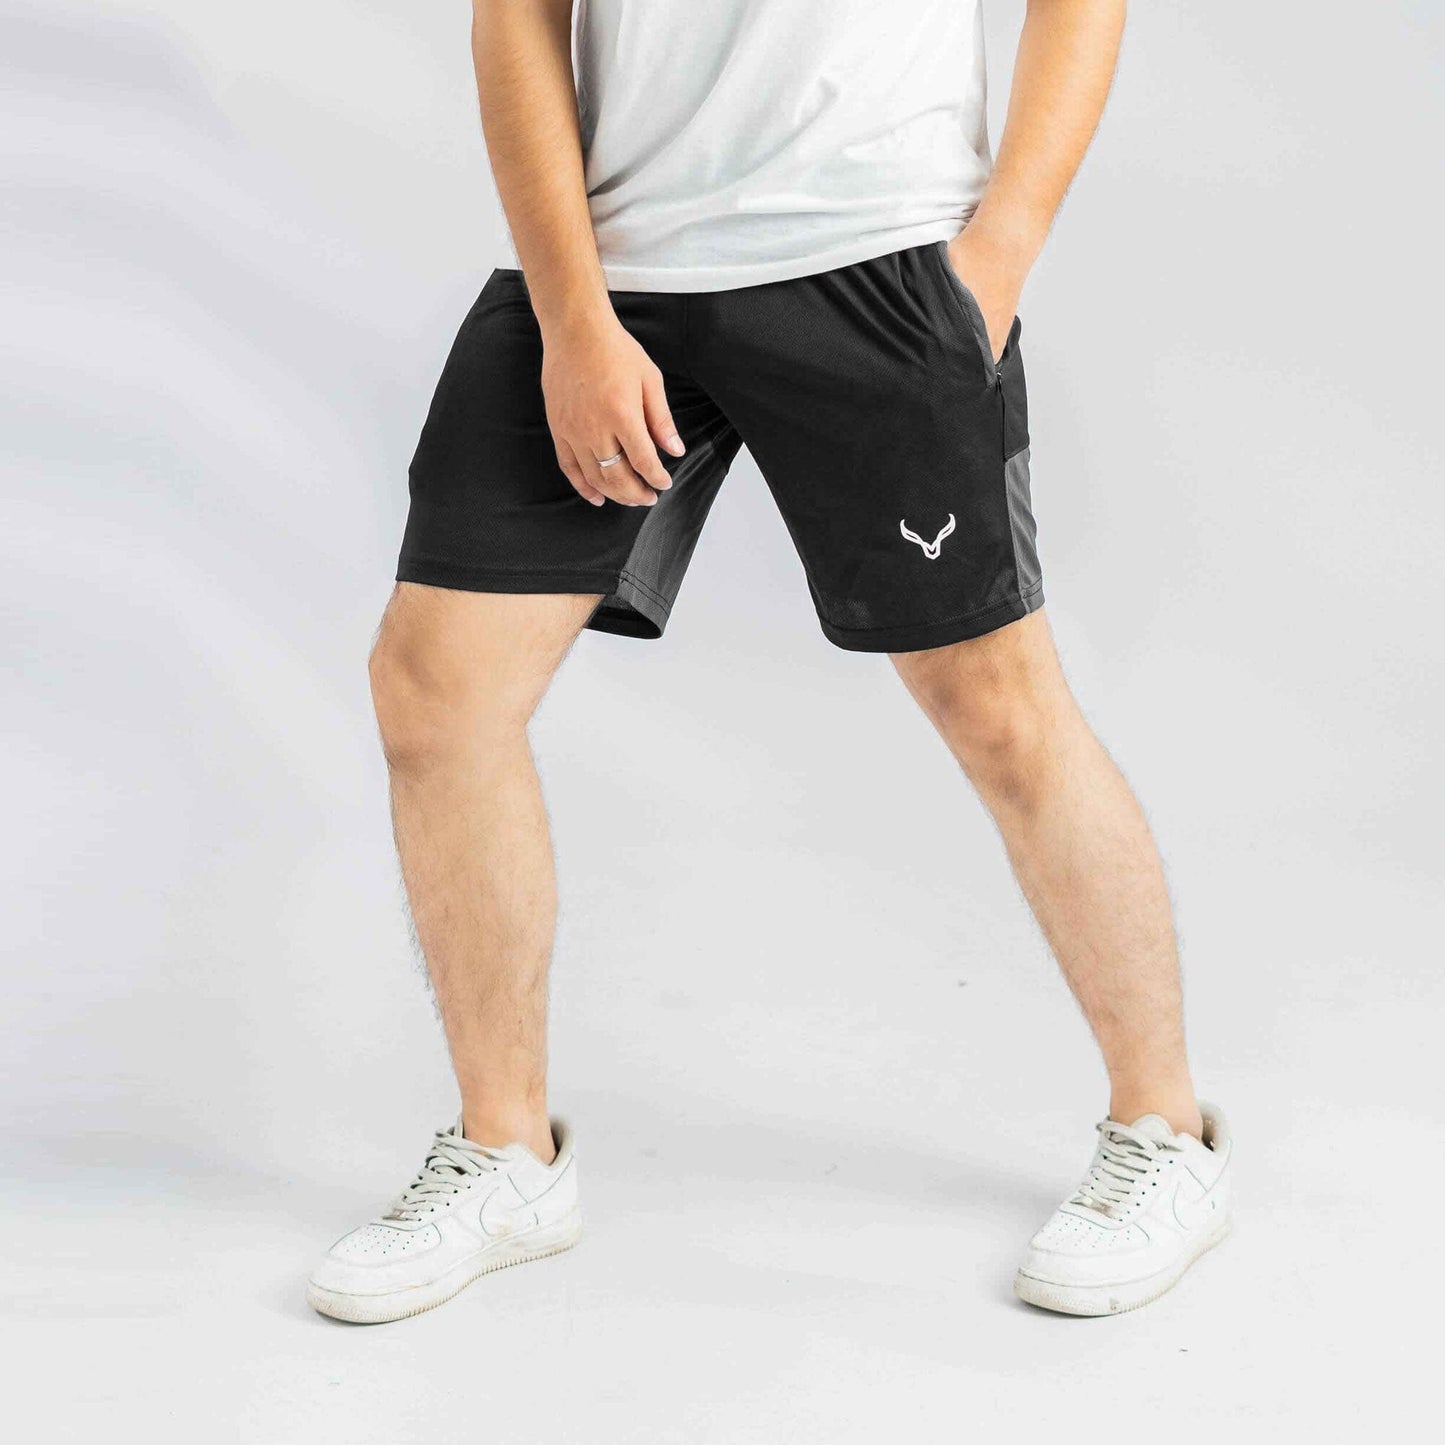 Polo Athletica Men's Rapid-Dry Gym Activewear Shorts with Side Panel Men's Shorts Polo Republica Black & Graphite S 